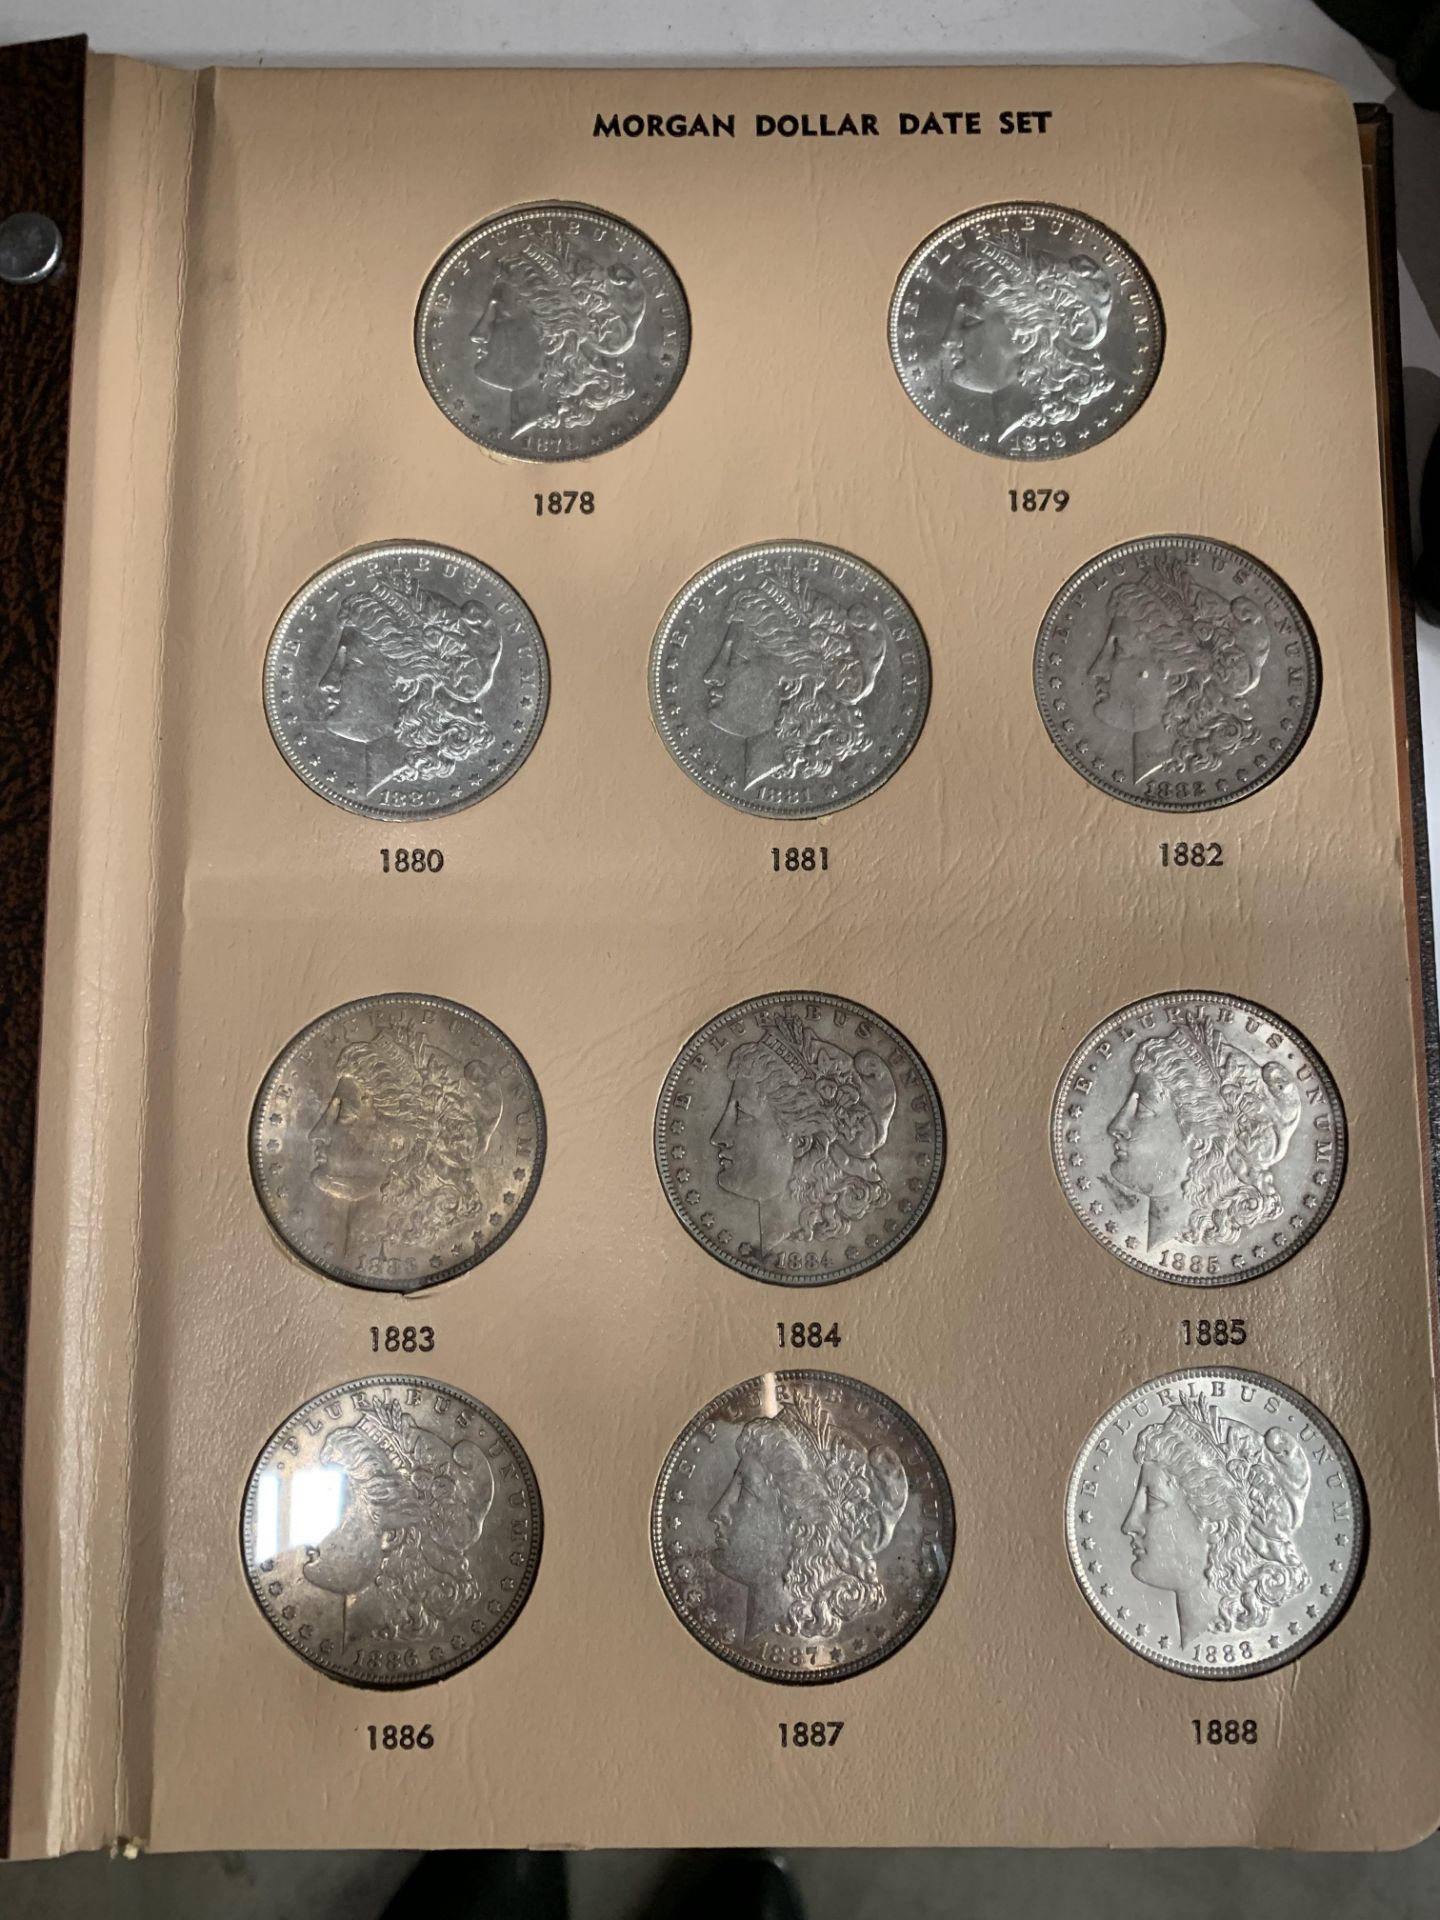 Morgan silver dollar complete date set 1878-1904 - 28 coins including rare dates 1893 and 1895 - Image 4 of 10